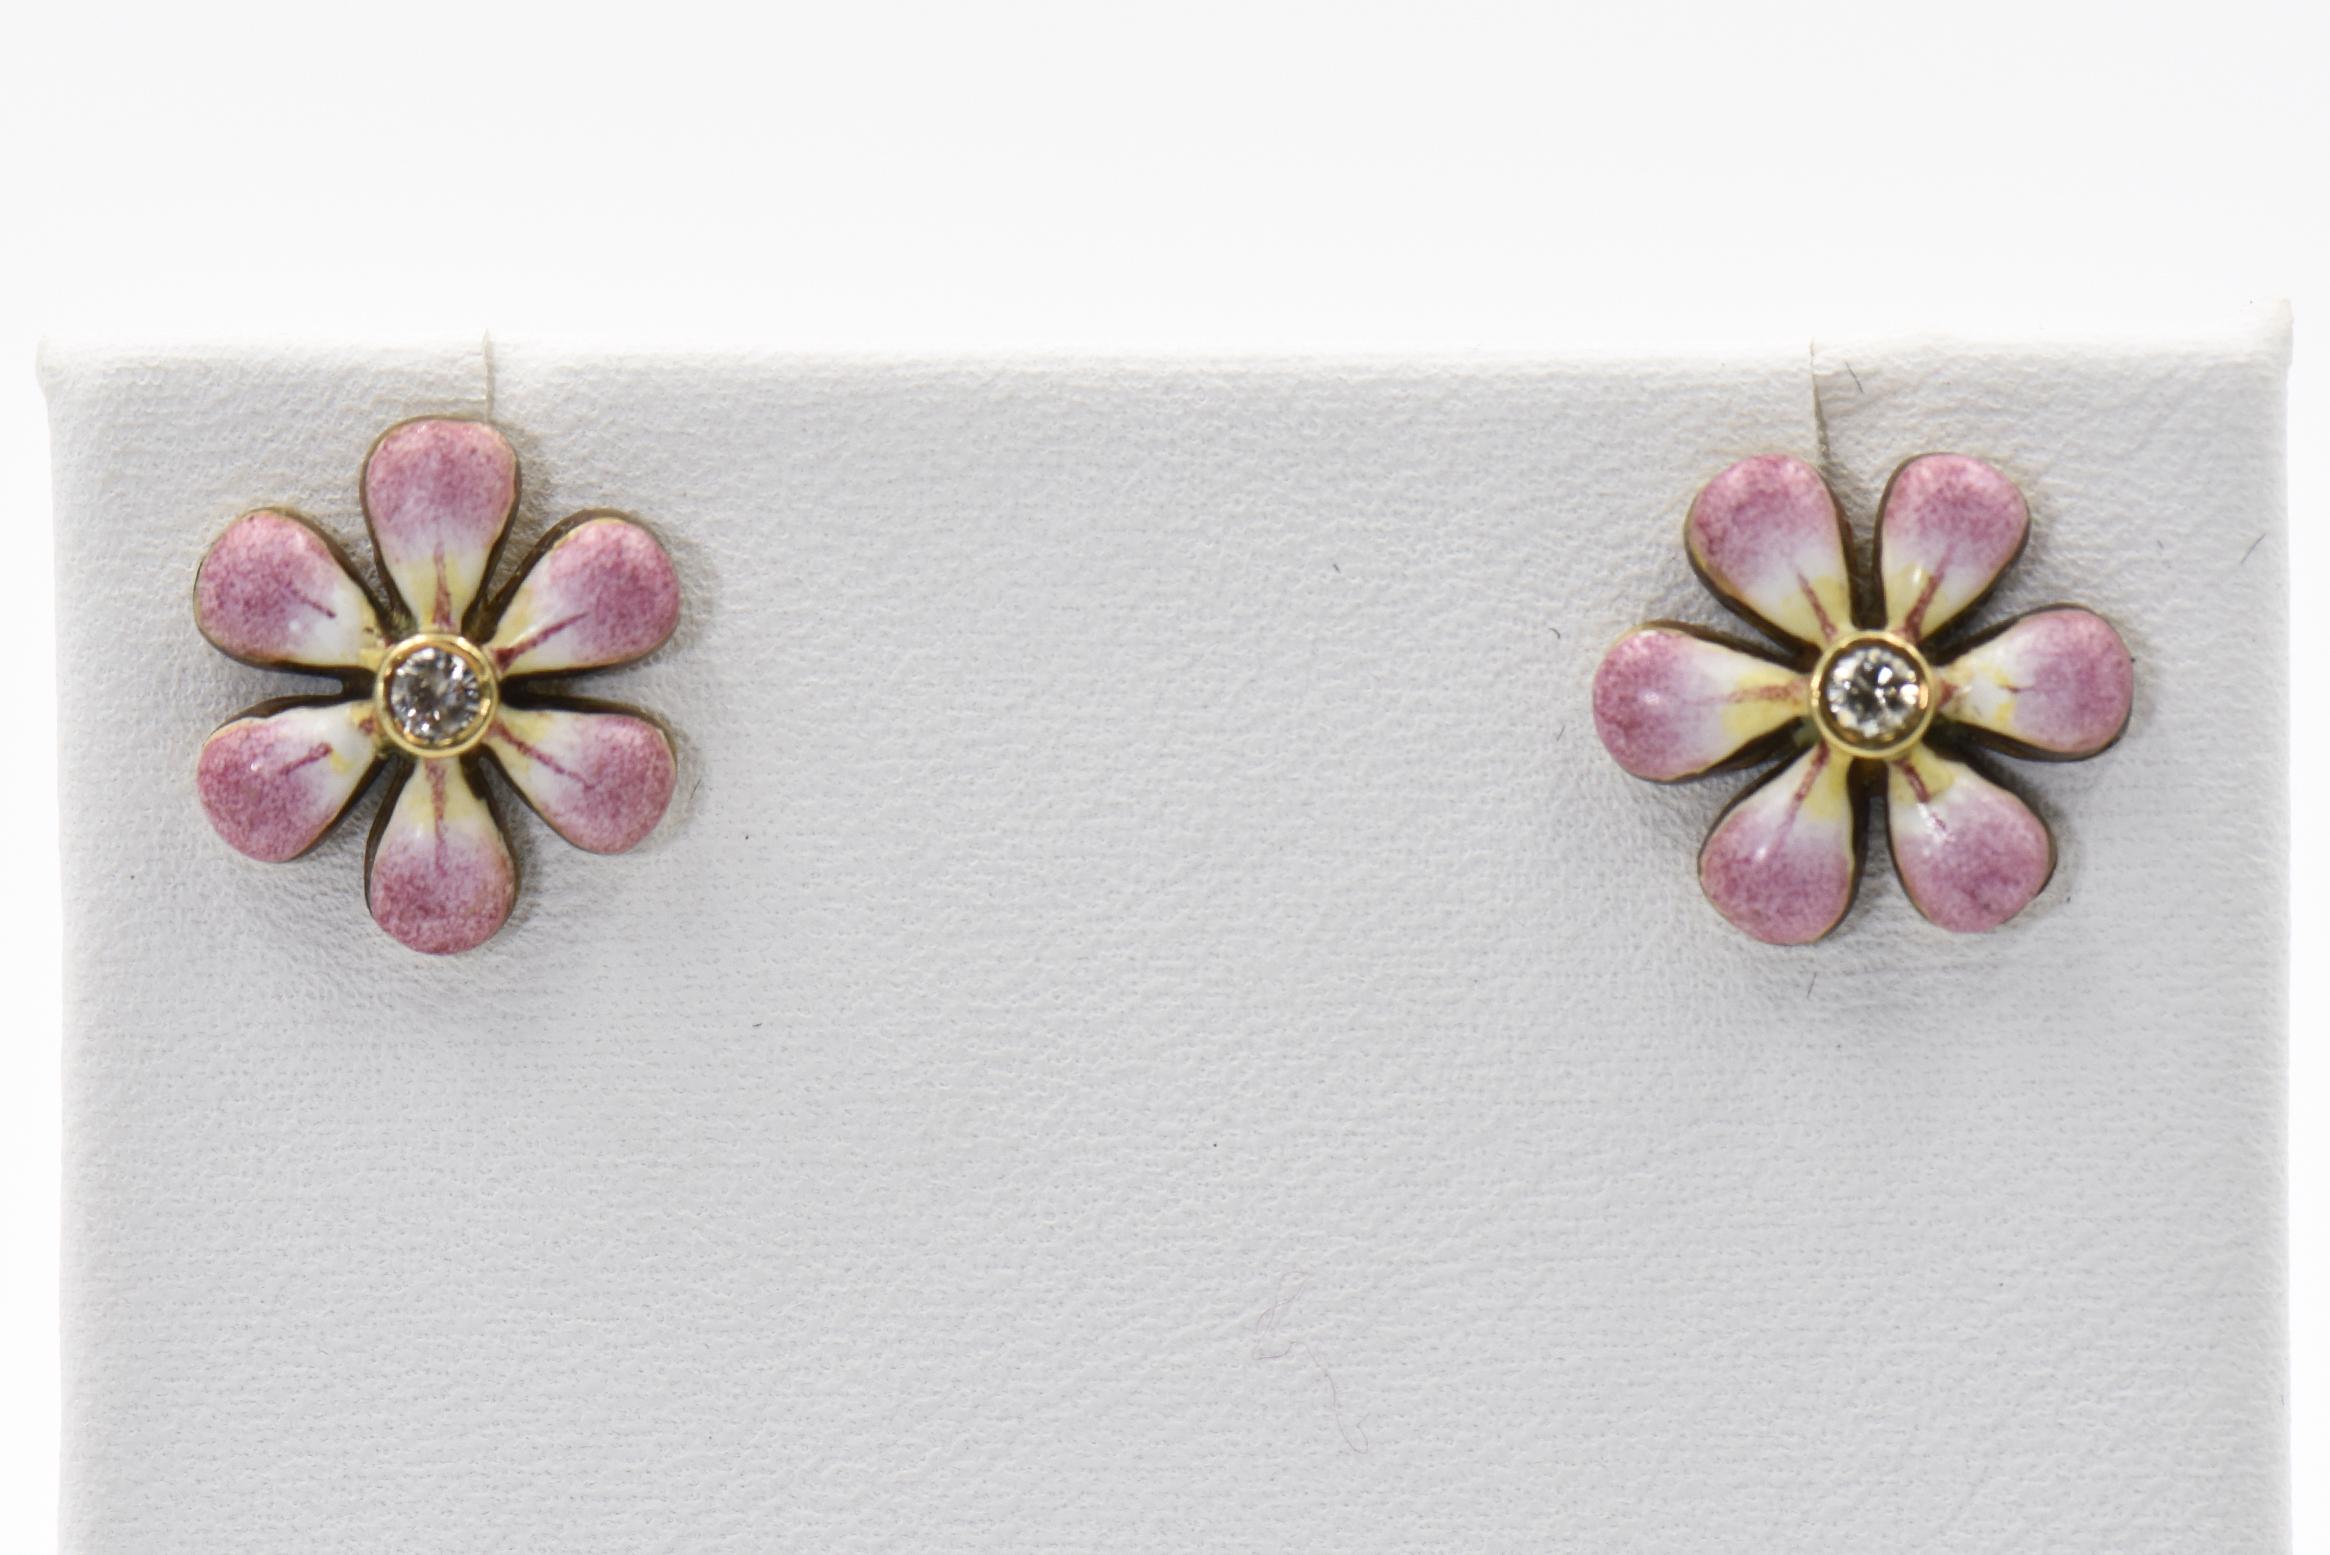 This pair of pink enamel daisy earrings are part of the daisy line, a beautiful handmade line of jewelry by Sandra J. Sensations. Each flower is hand painted by an enamel artist. The flowers are 14k with diamonds in the center. Each diamond is